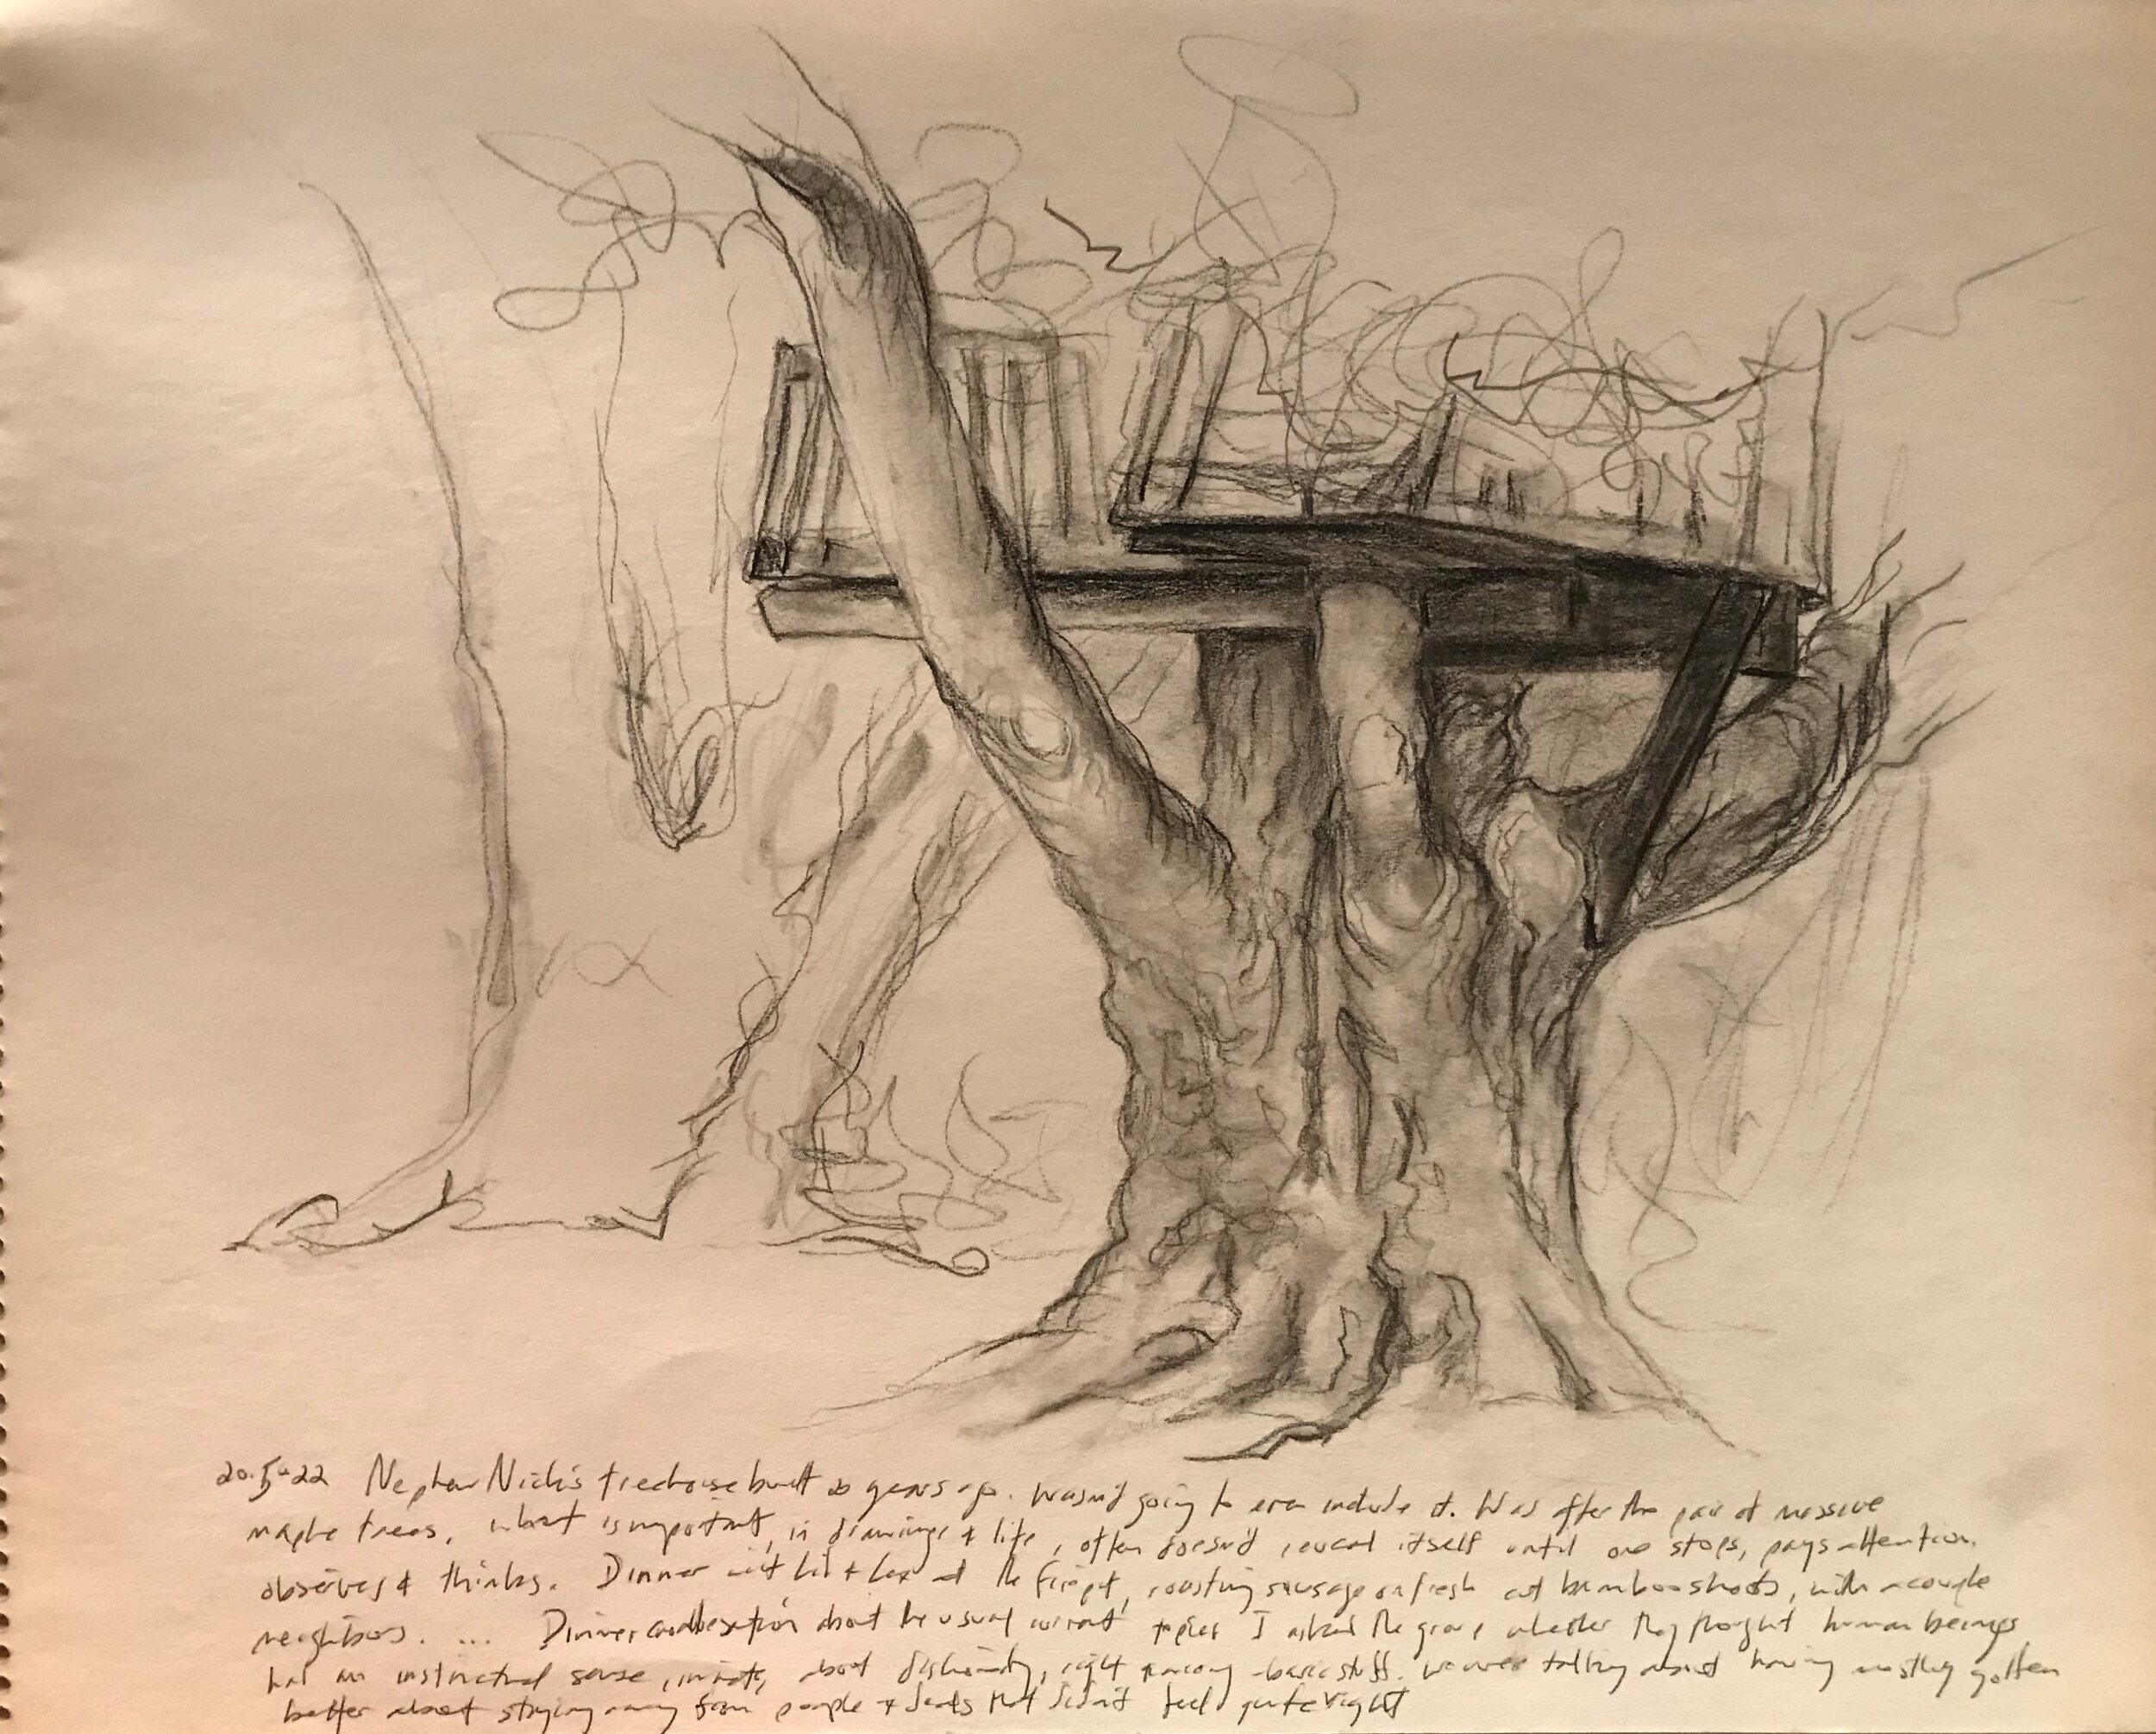 20-05-22 Nick's Treehouse  Charcola on Paper  111 x 14 inches.jpg